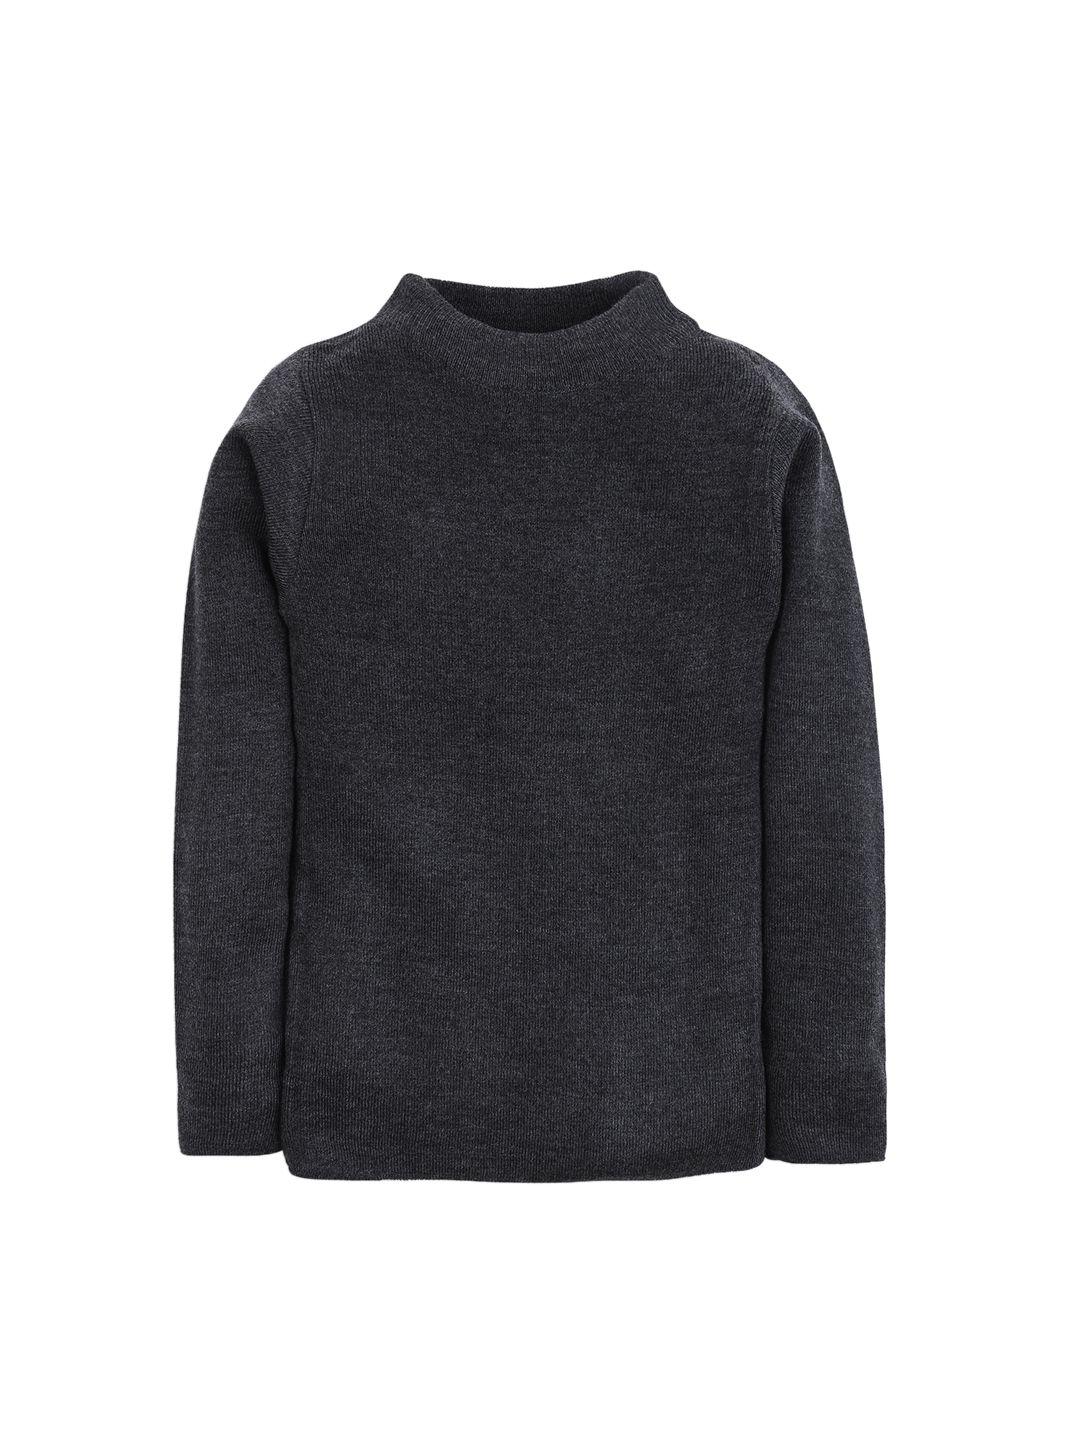 rvk-unisex-charcoal-solid-sweater